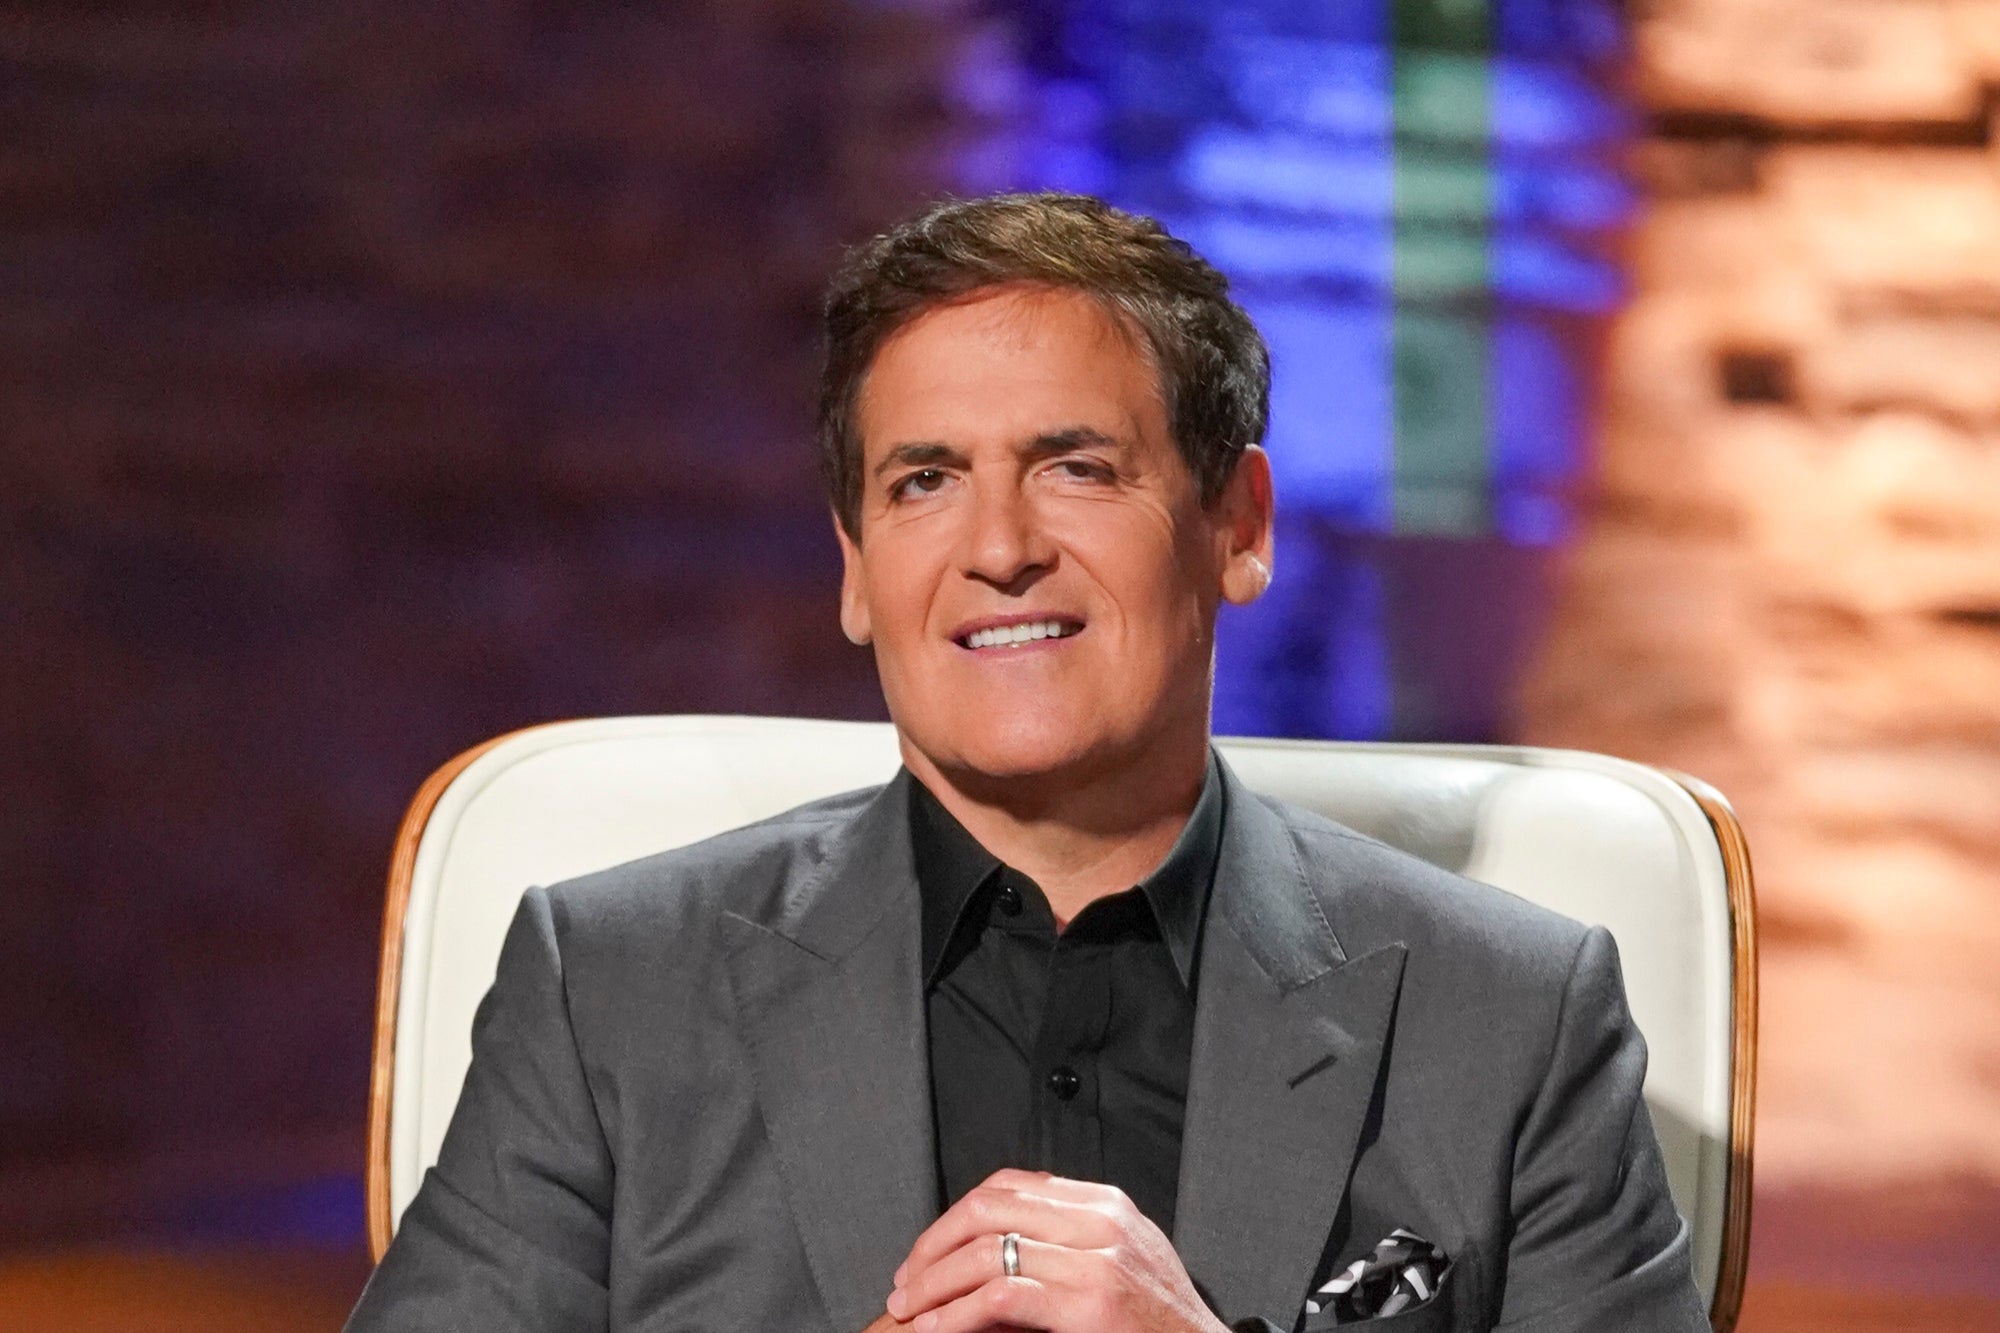 SEC Regulating The Crypto Sector Will Be A “Nightmare,” Says Billionaire Mark Cuban